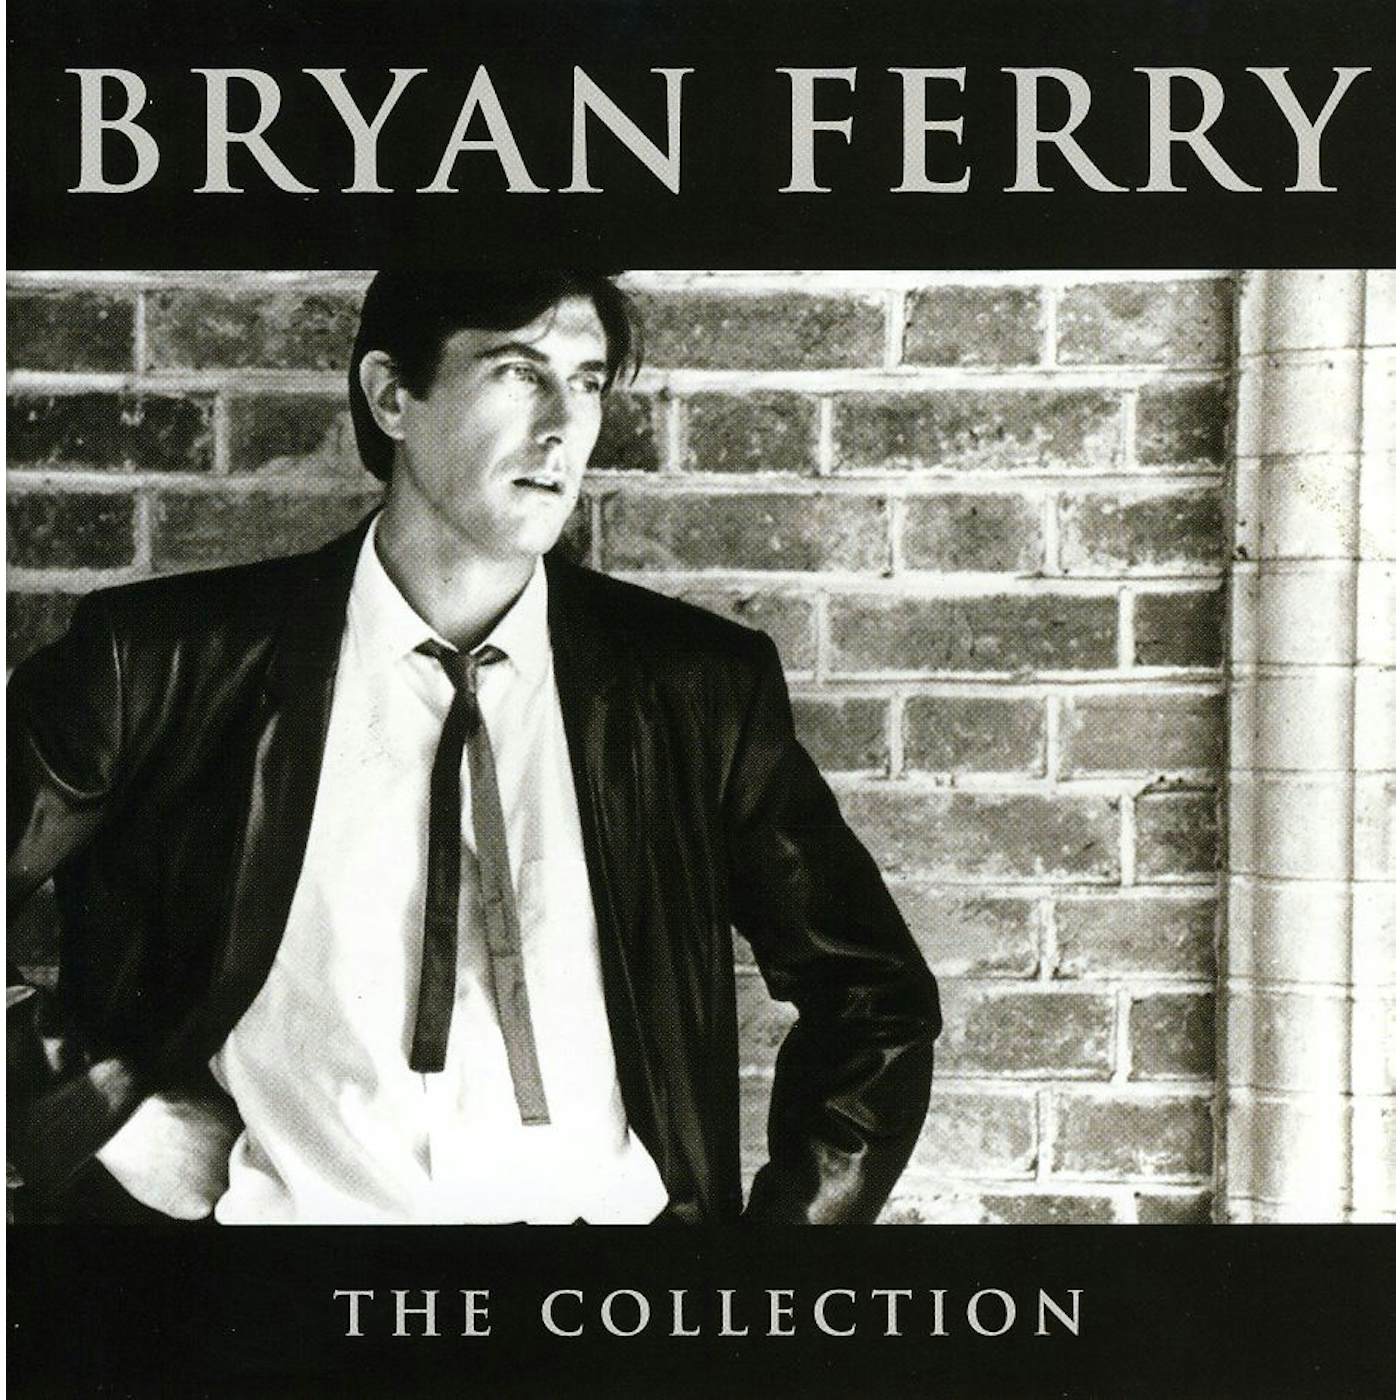 Bryan Ferry COLLECTION CD